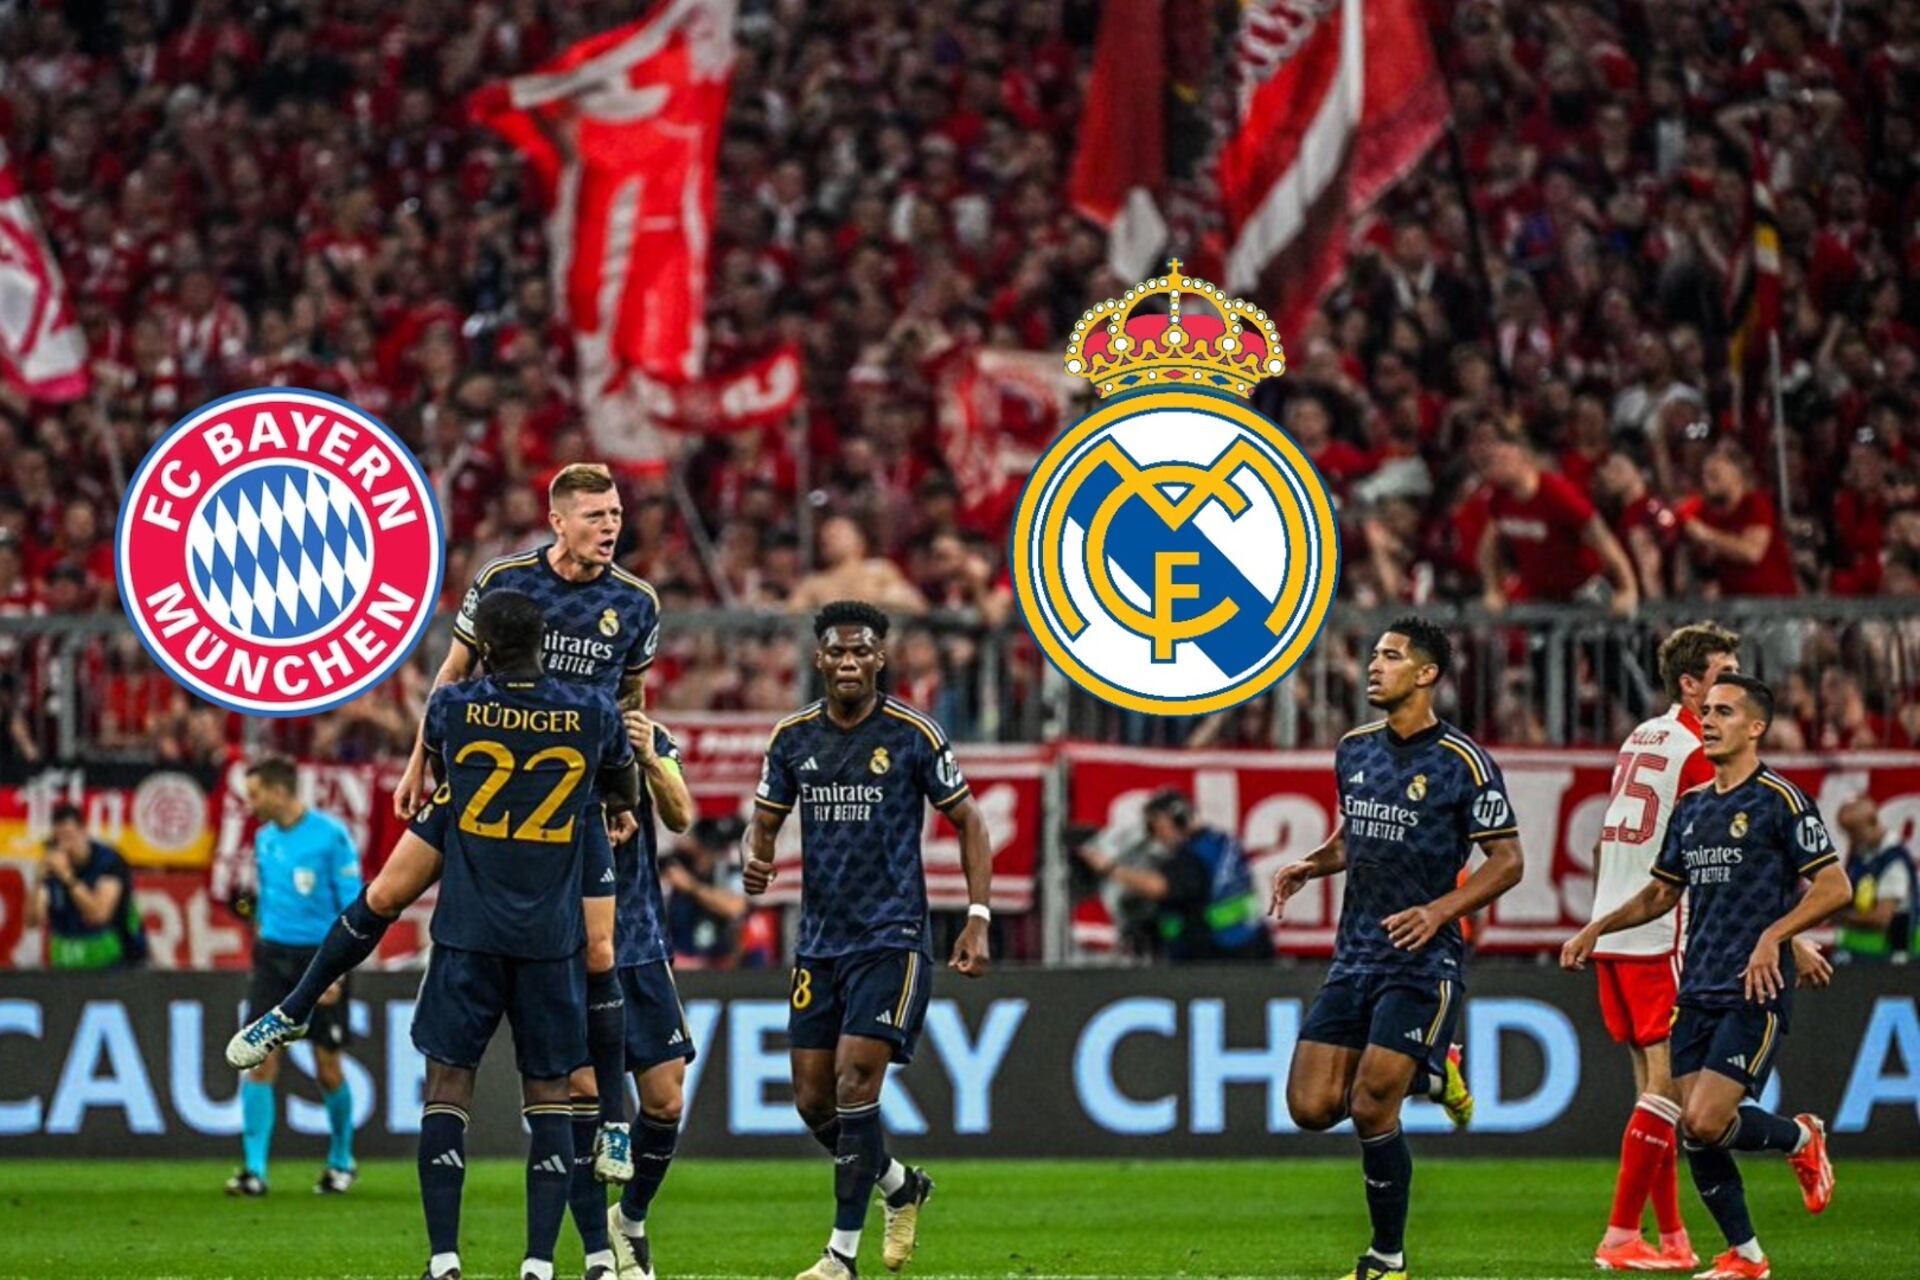 (VIDEO) They were booing Kroos at Real Madrid vs Bayern in Champions League and this is how he answered